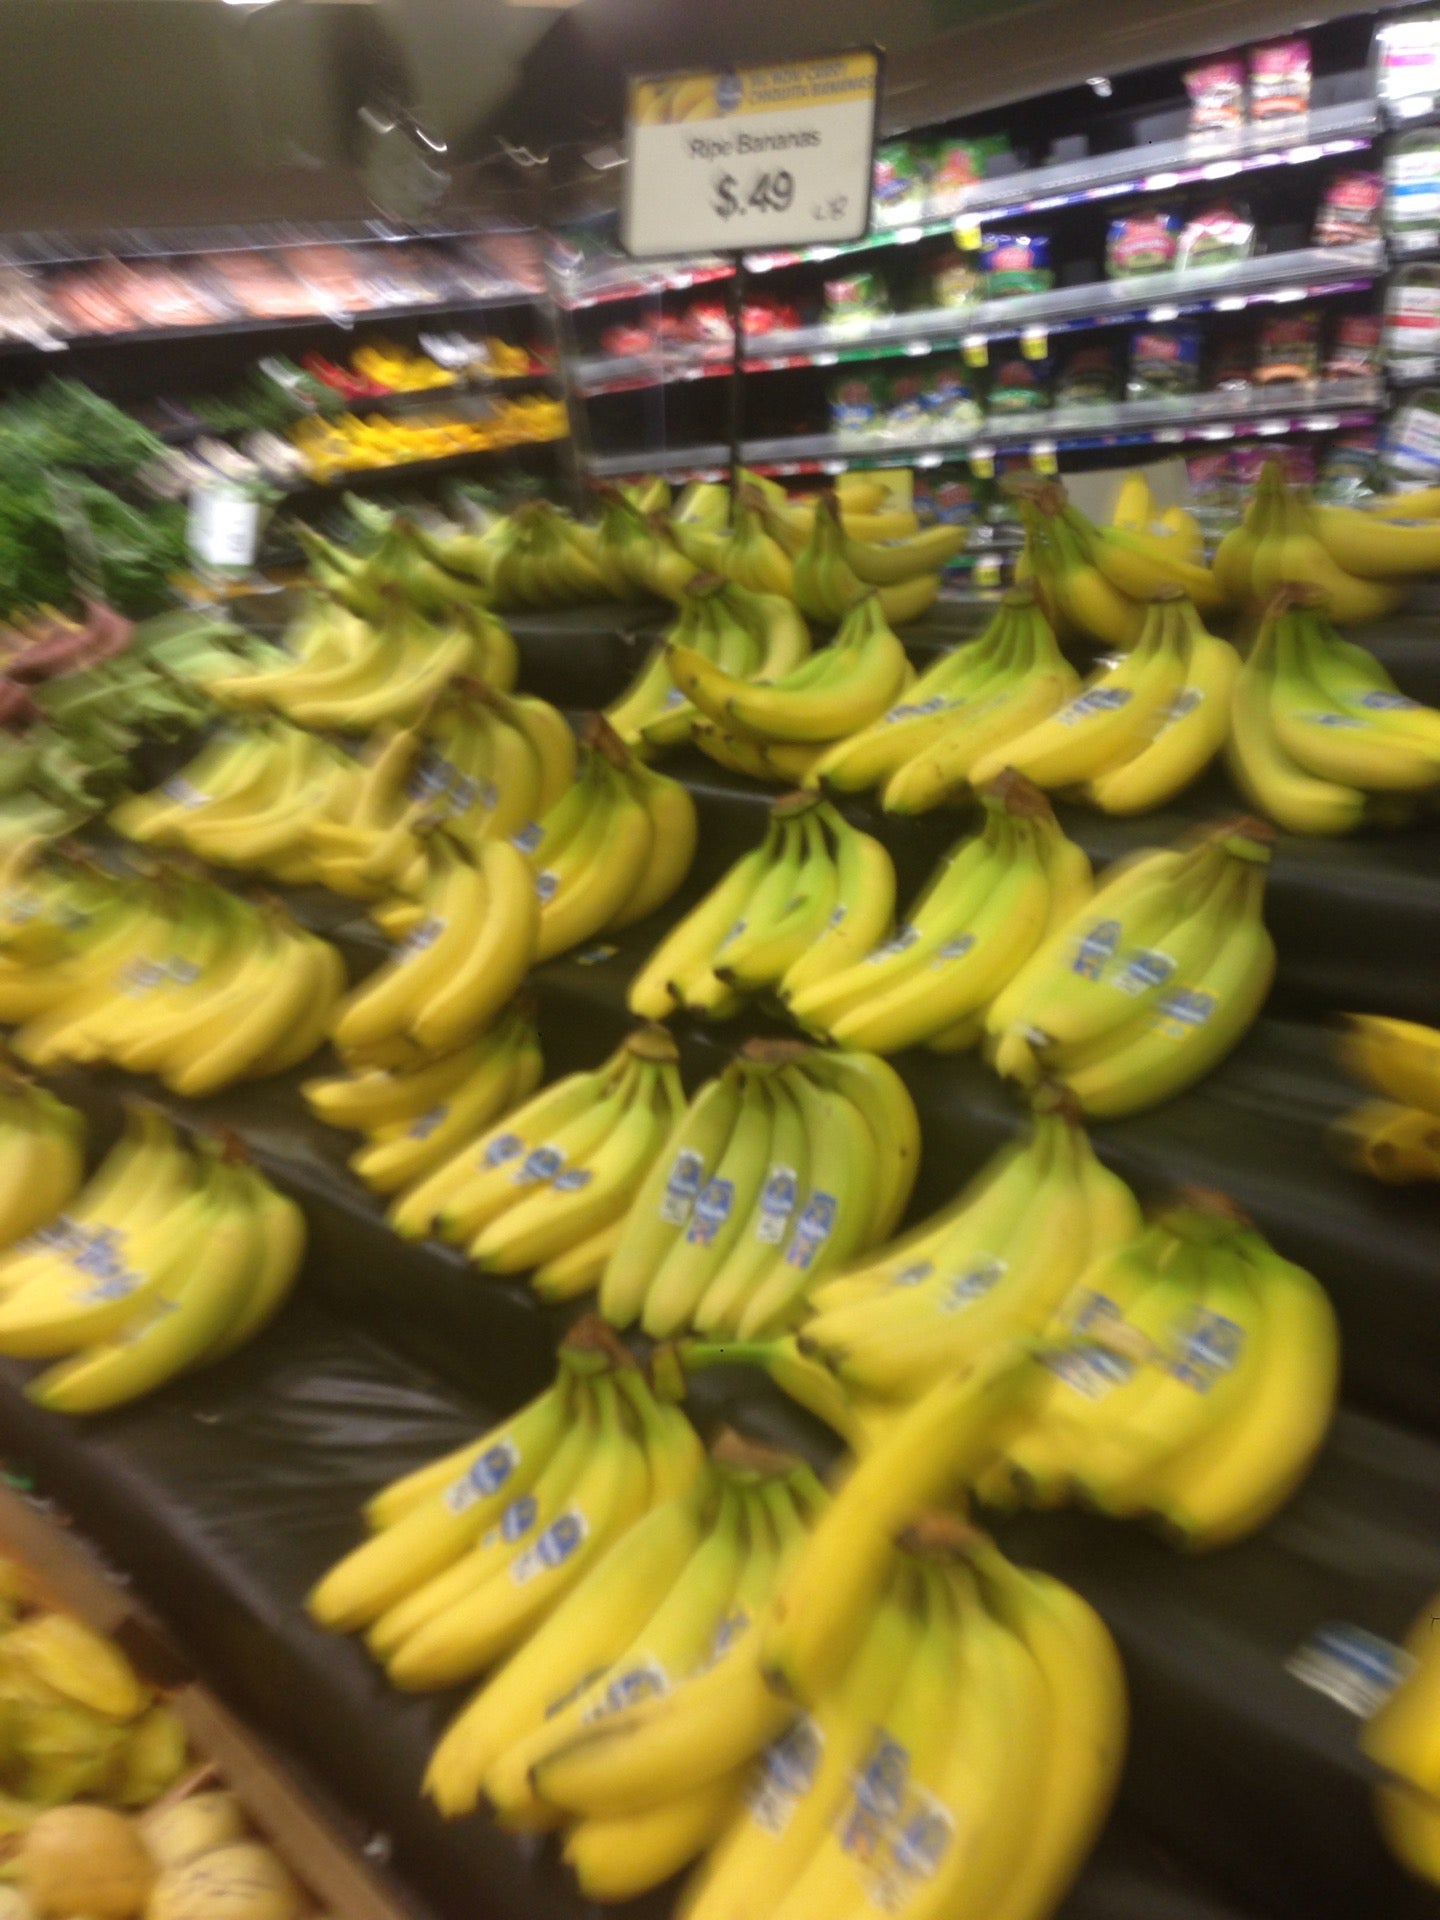 I requested 8 bananas in my weekly grocery pickup order…. They